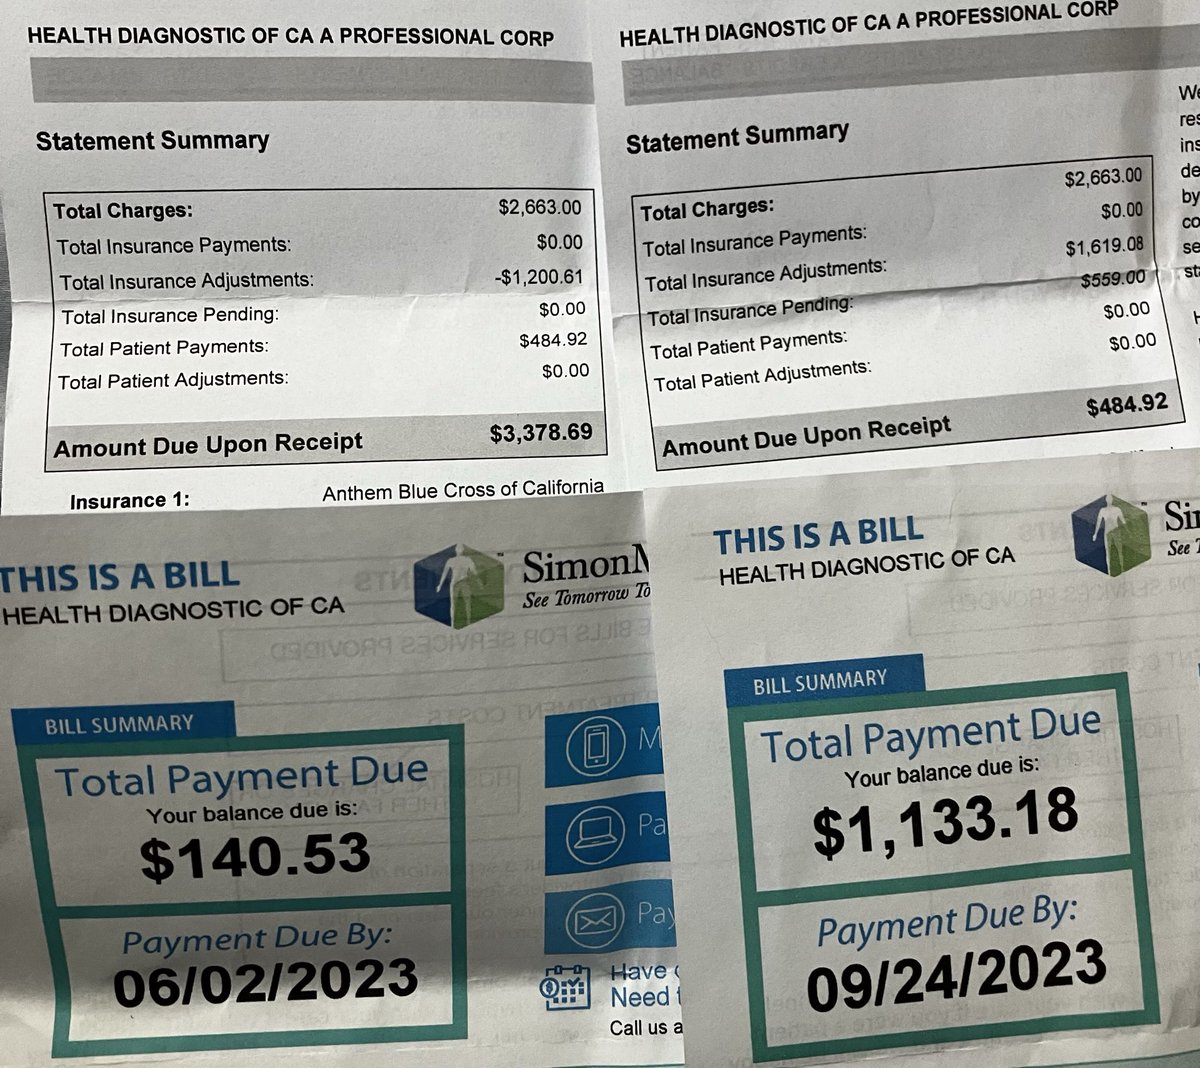 in january 2023, i had a simple ultrasound done at SimonMed. they sent me 4 bills totaling $5137 for it. after a year of emails and phone calls, they finally admitted today that i only owed $140.53 and are mailing me a refund check! here's how i did it 🧵